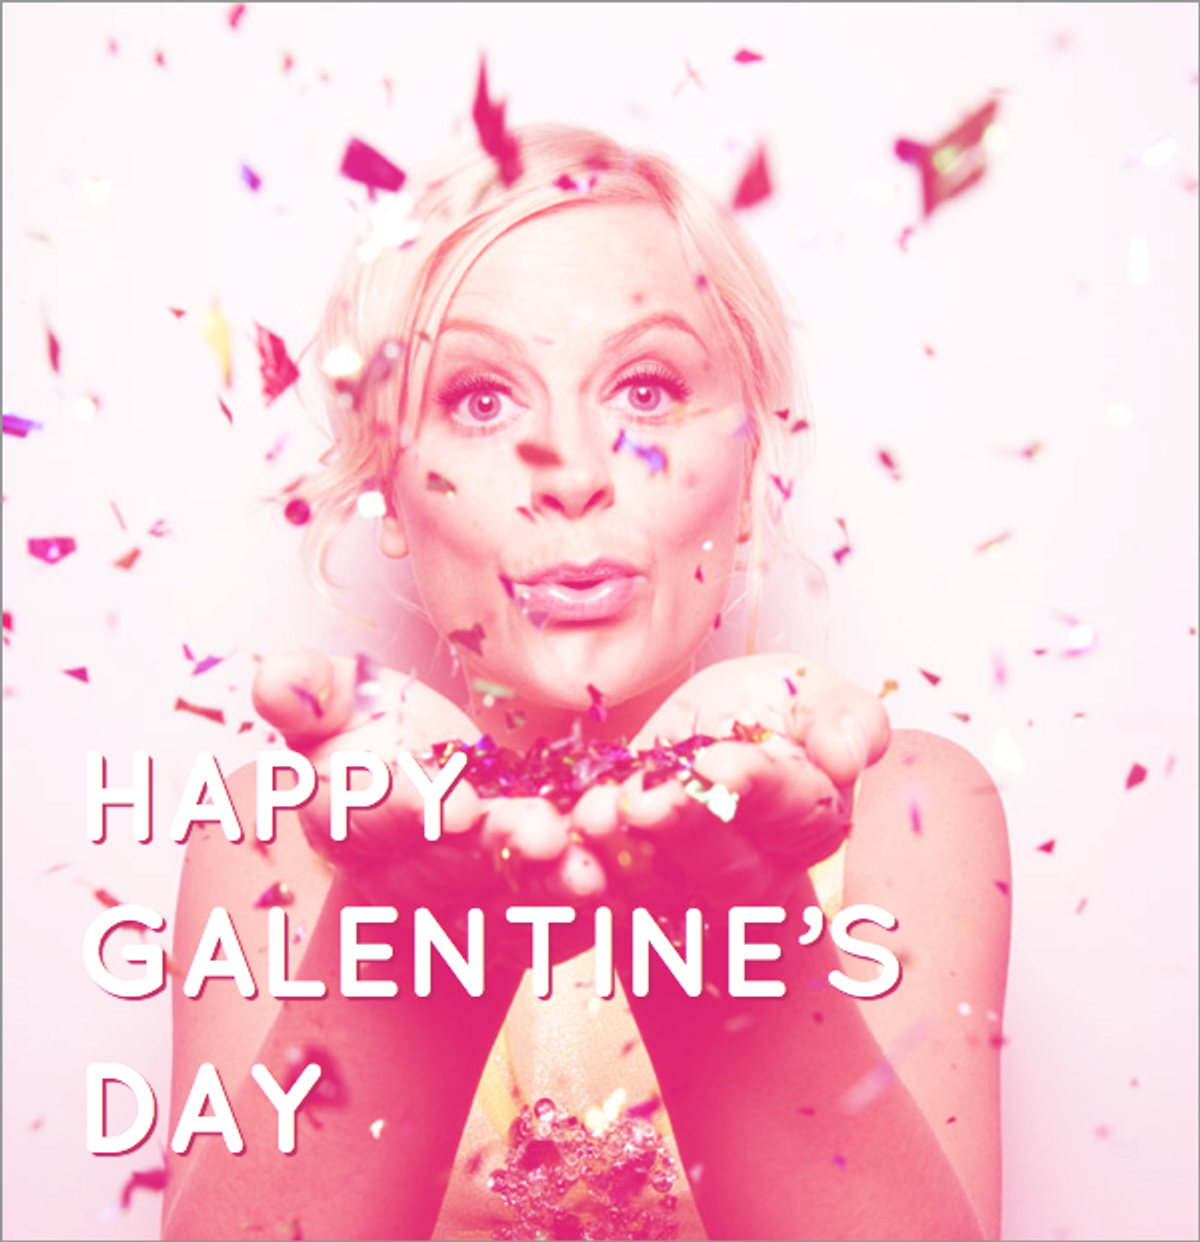 An Open Letter to my Galentines